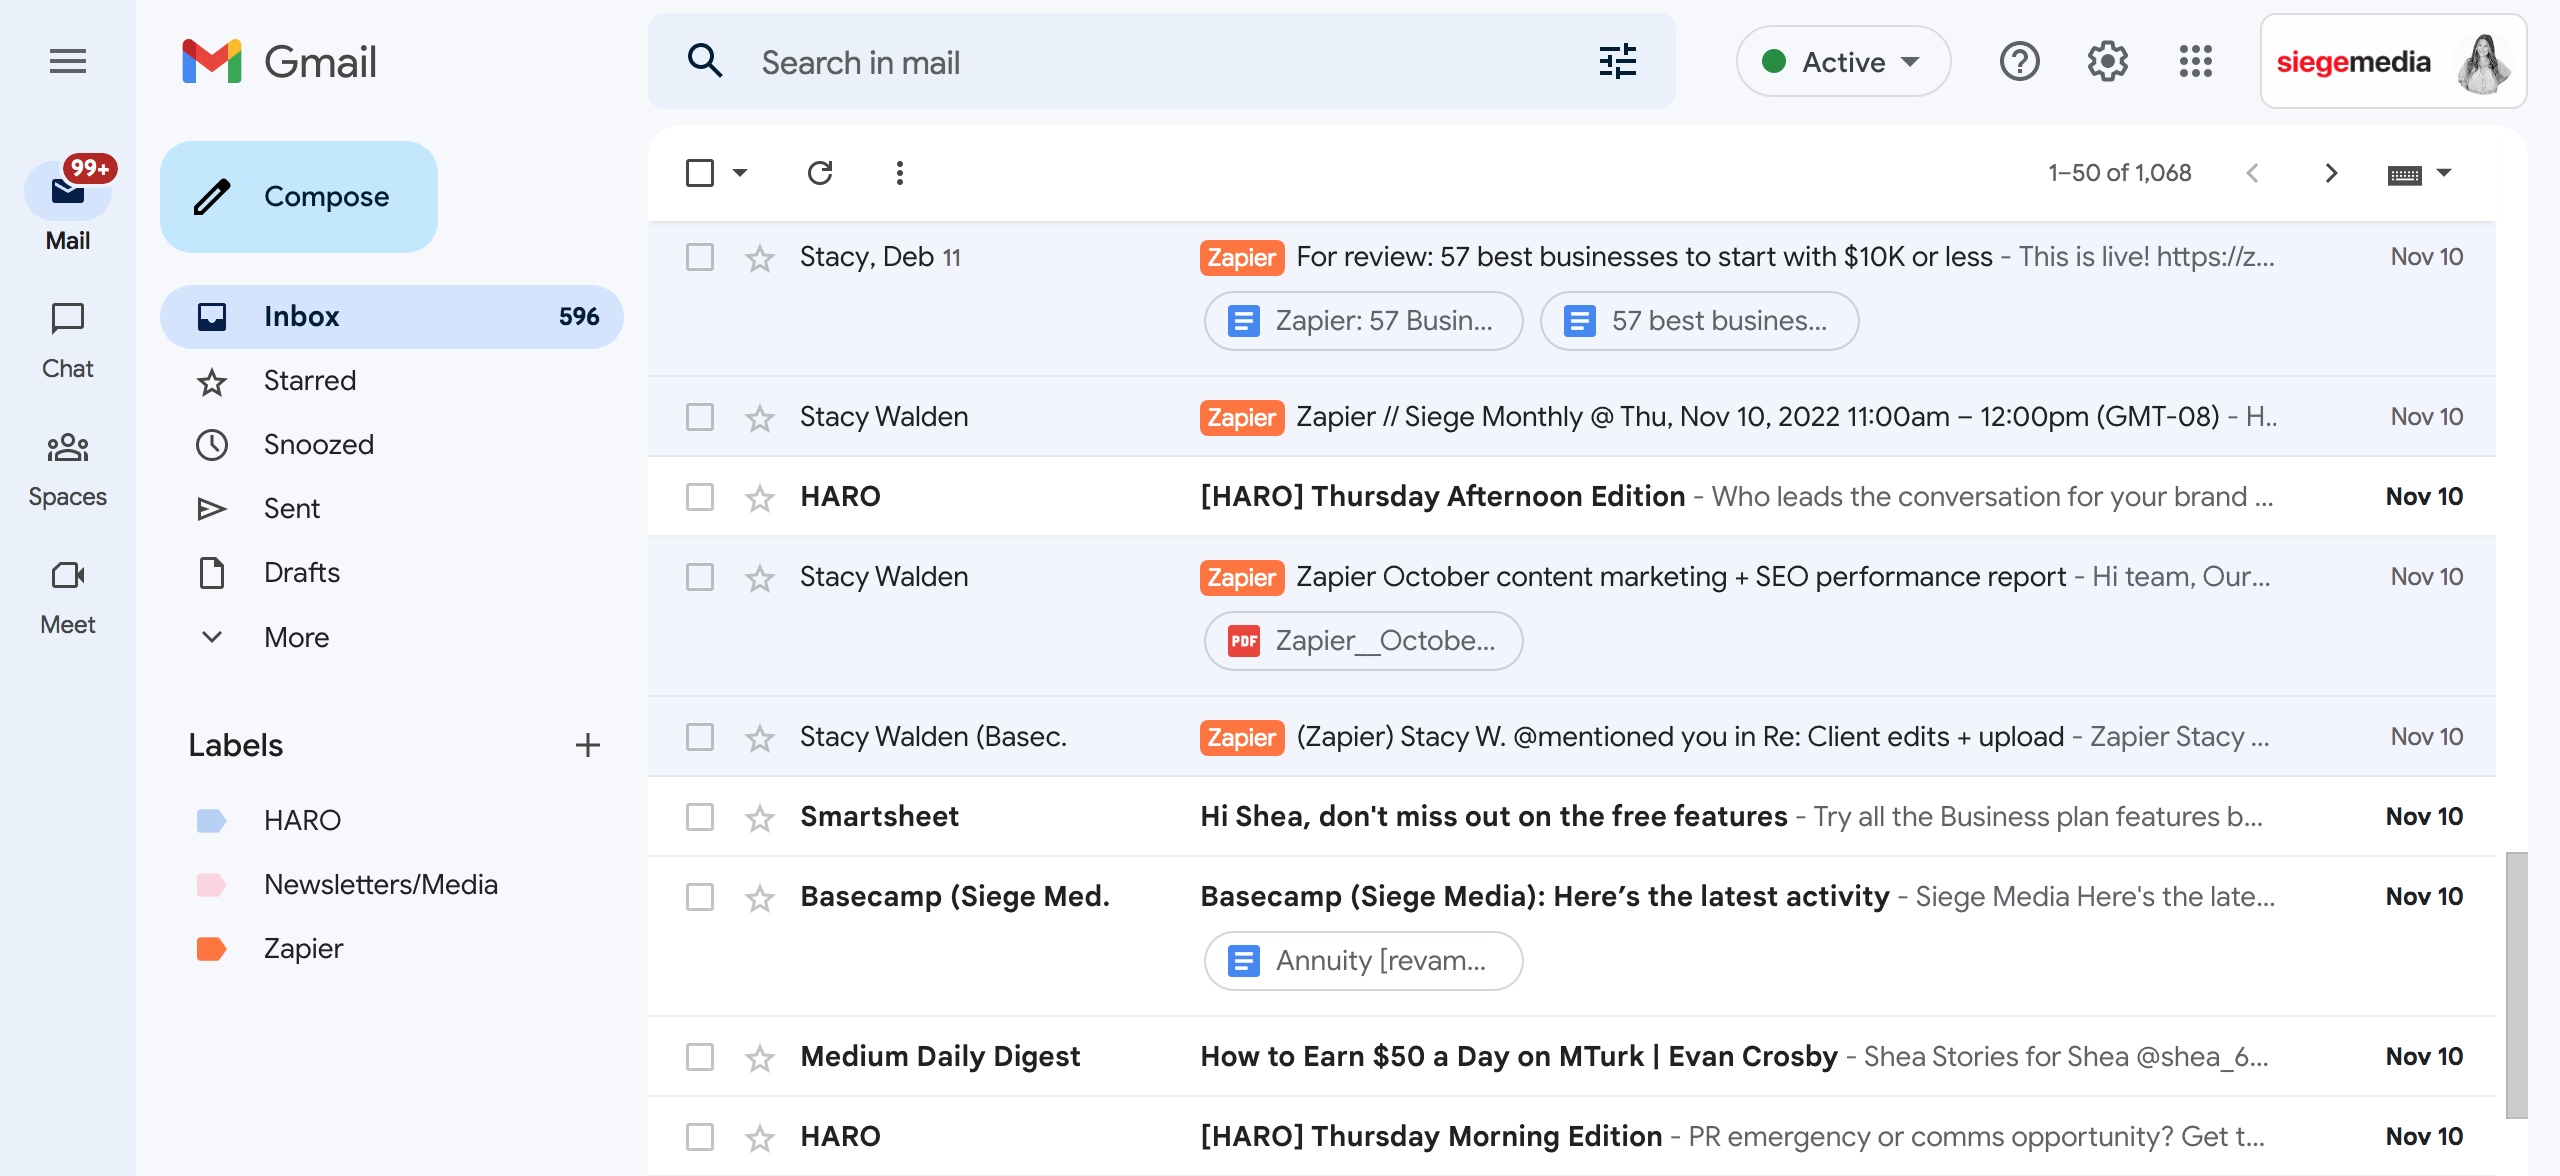 Gmail vs Outlook: The Ultimate Email Comparison - Blog - Shift